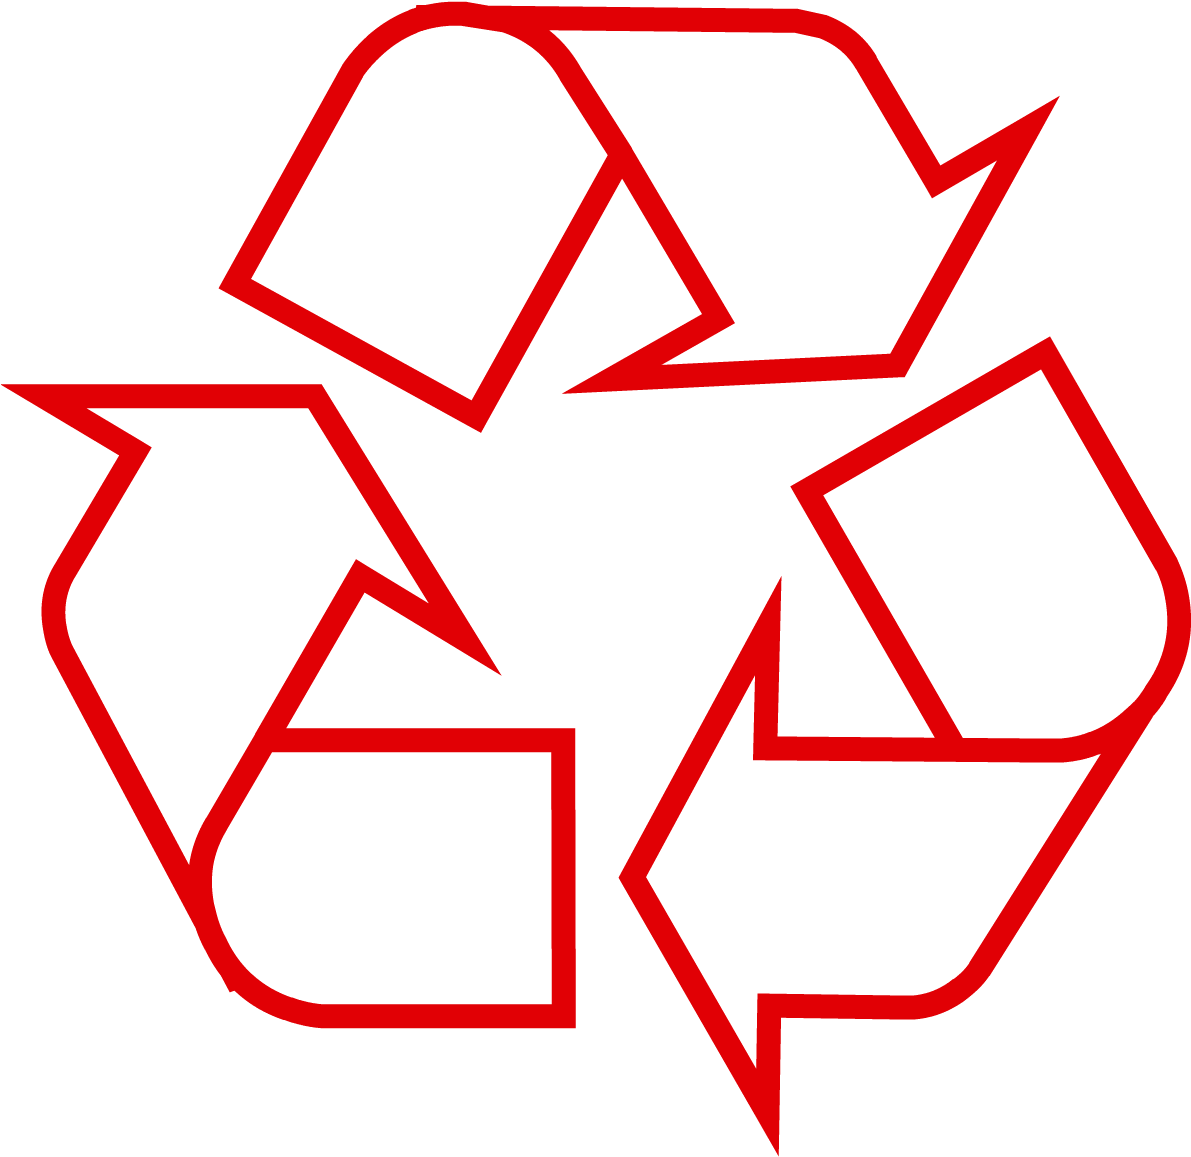 A Red Recycle Symbol On A Black Background